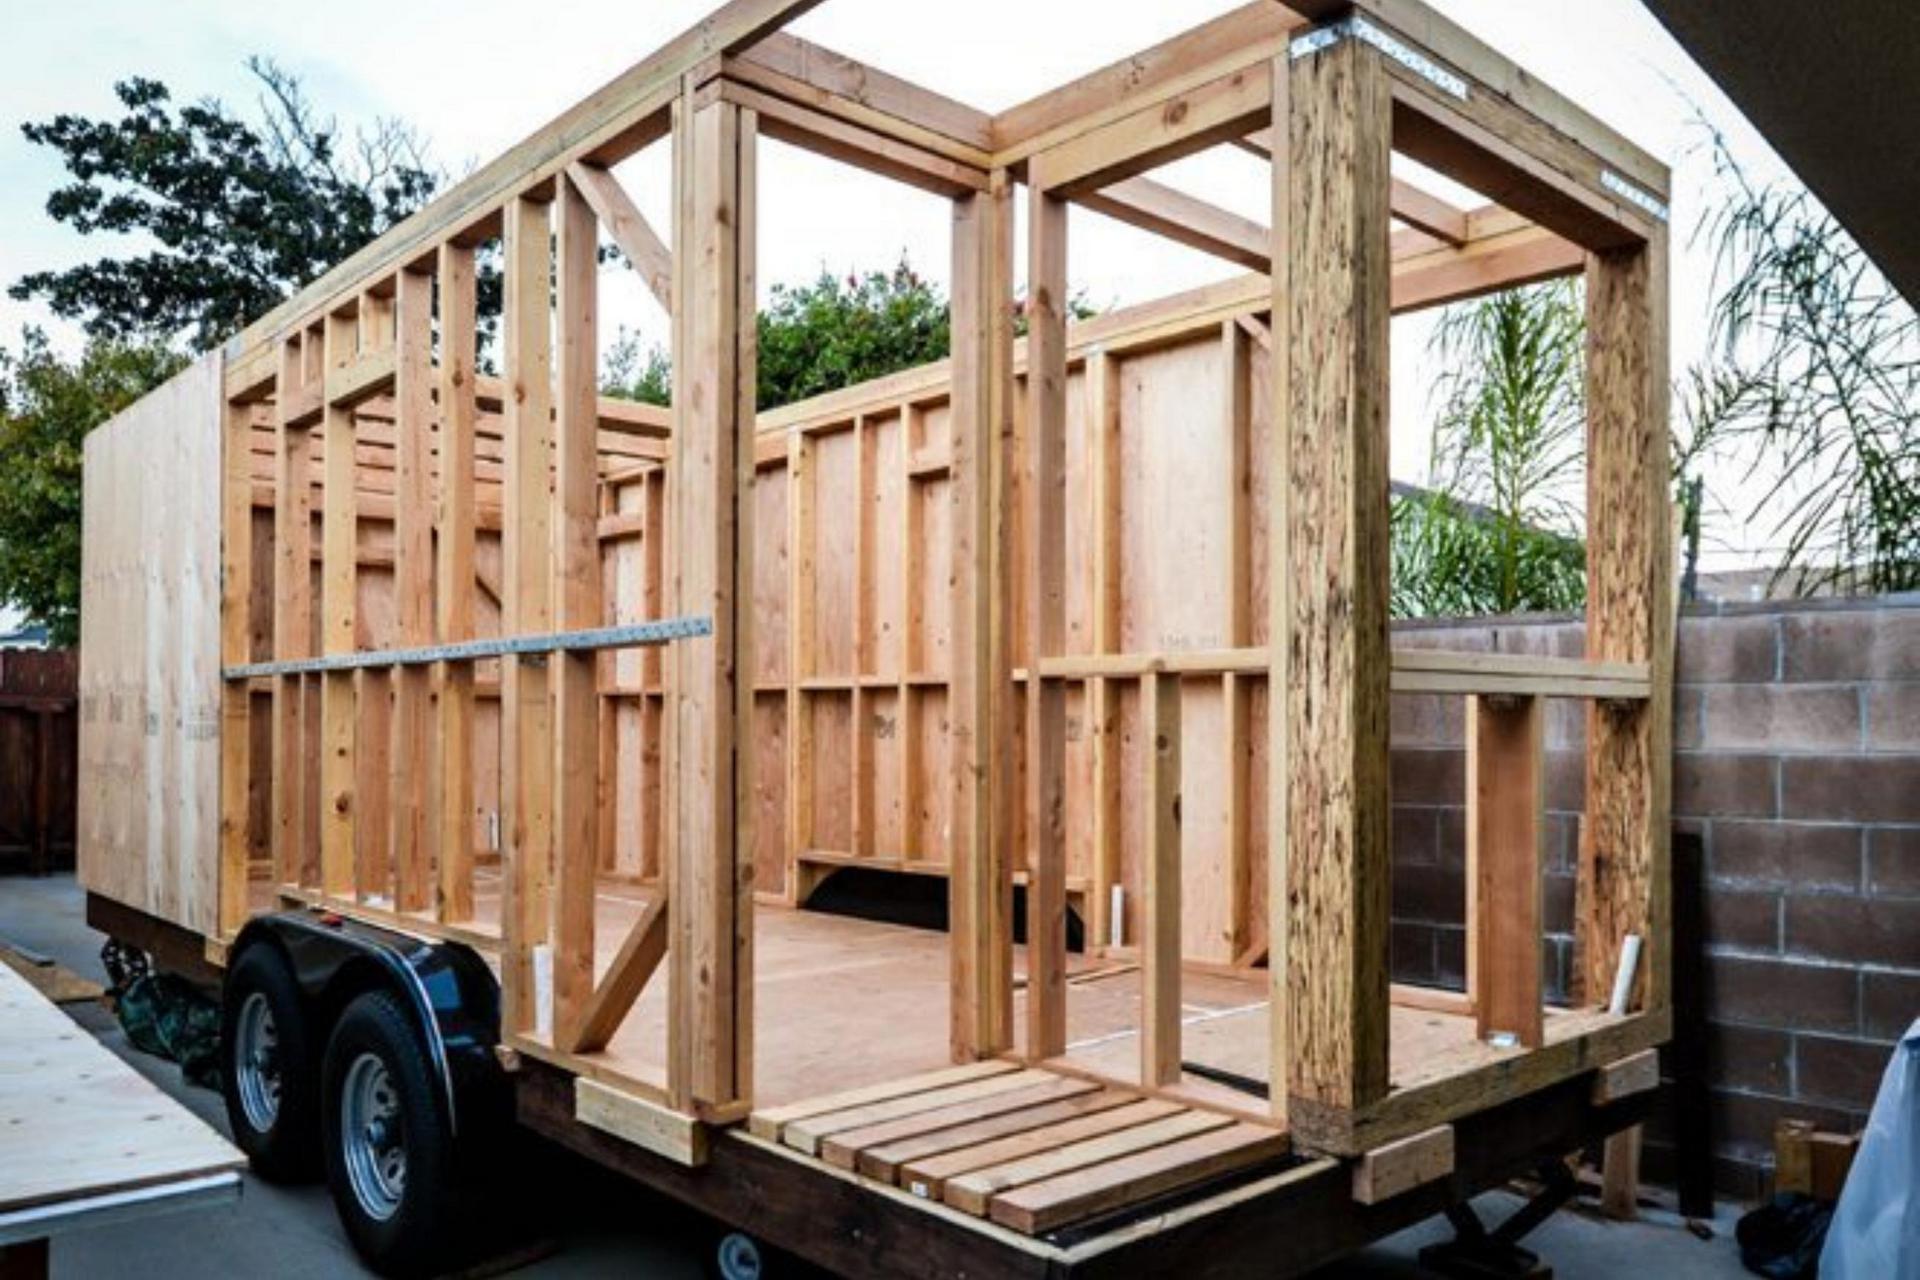 Best Choice of Materials to Build your Tiny House